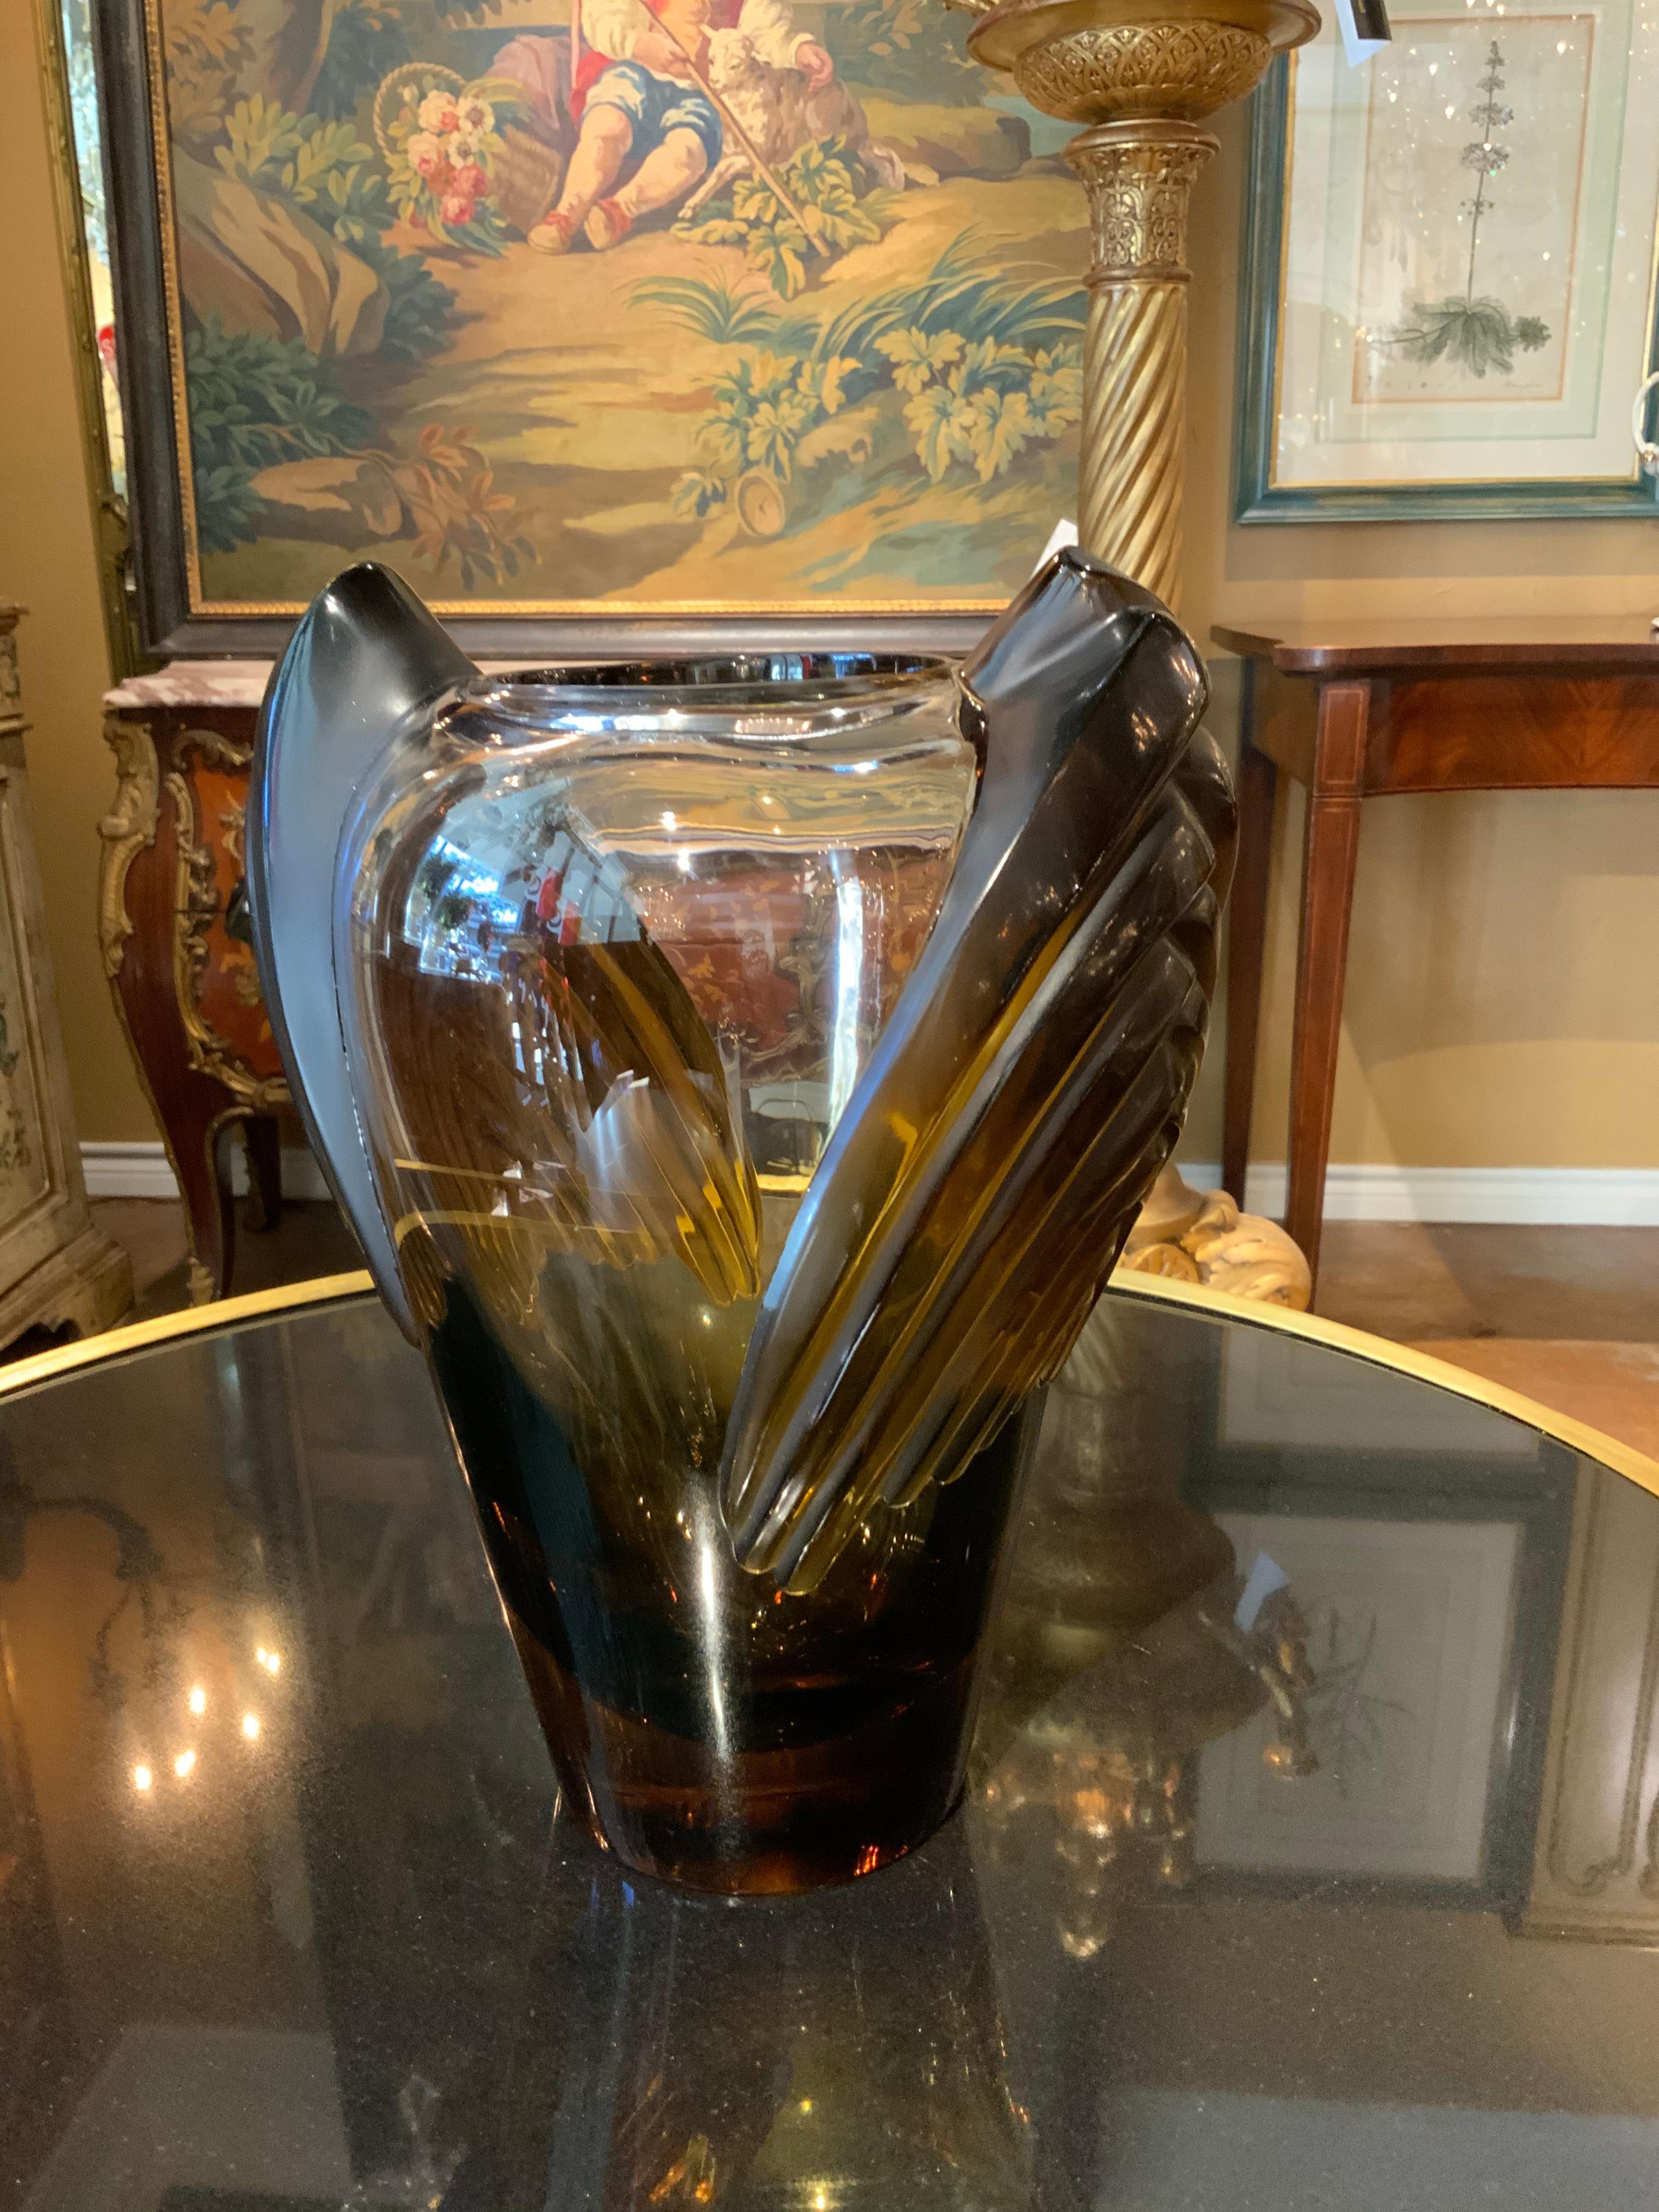 20th Century Lalique Vase “Marrakesh” in Smoked Amber Glass, Art Deco Style